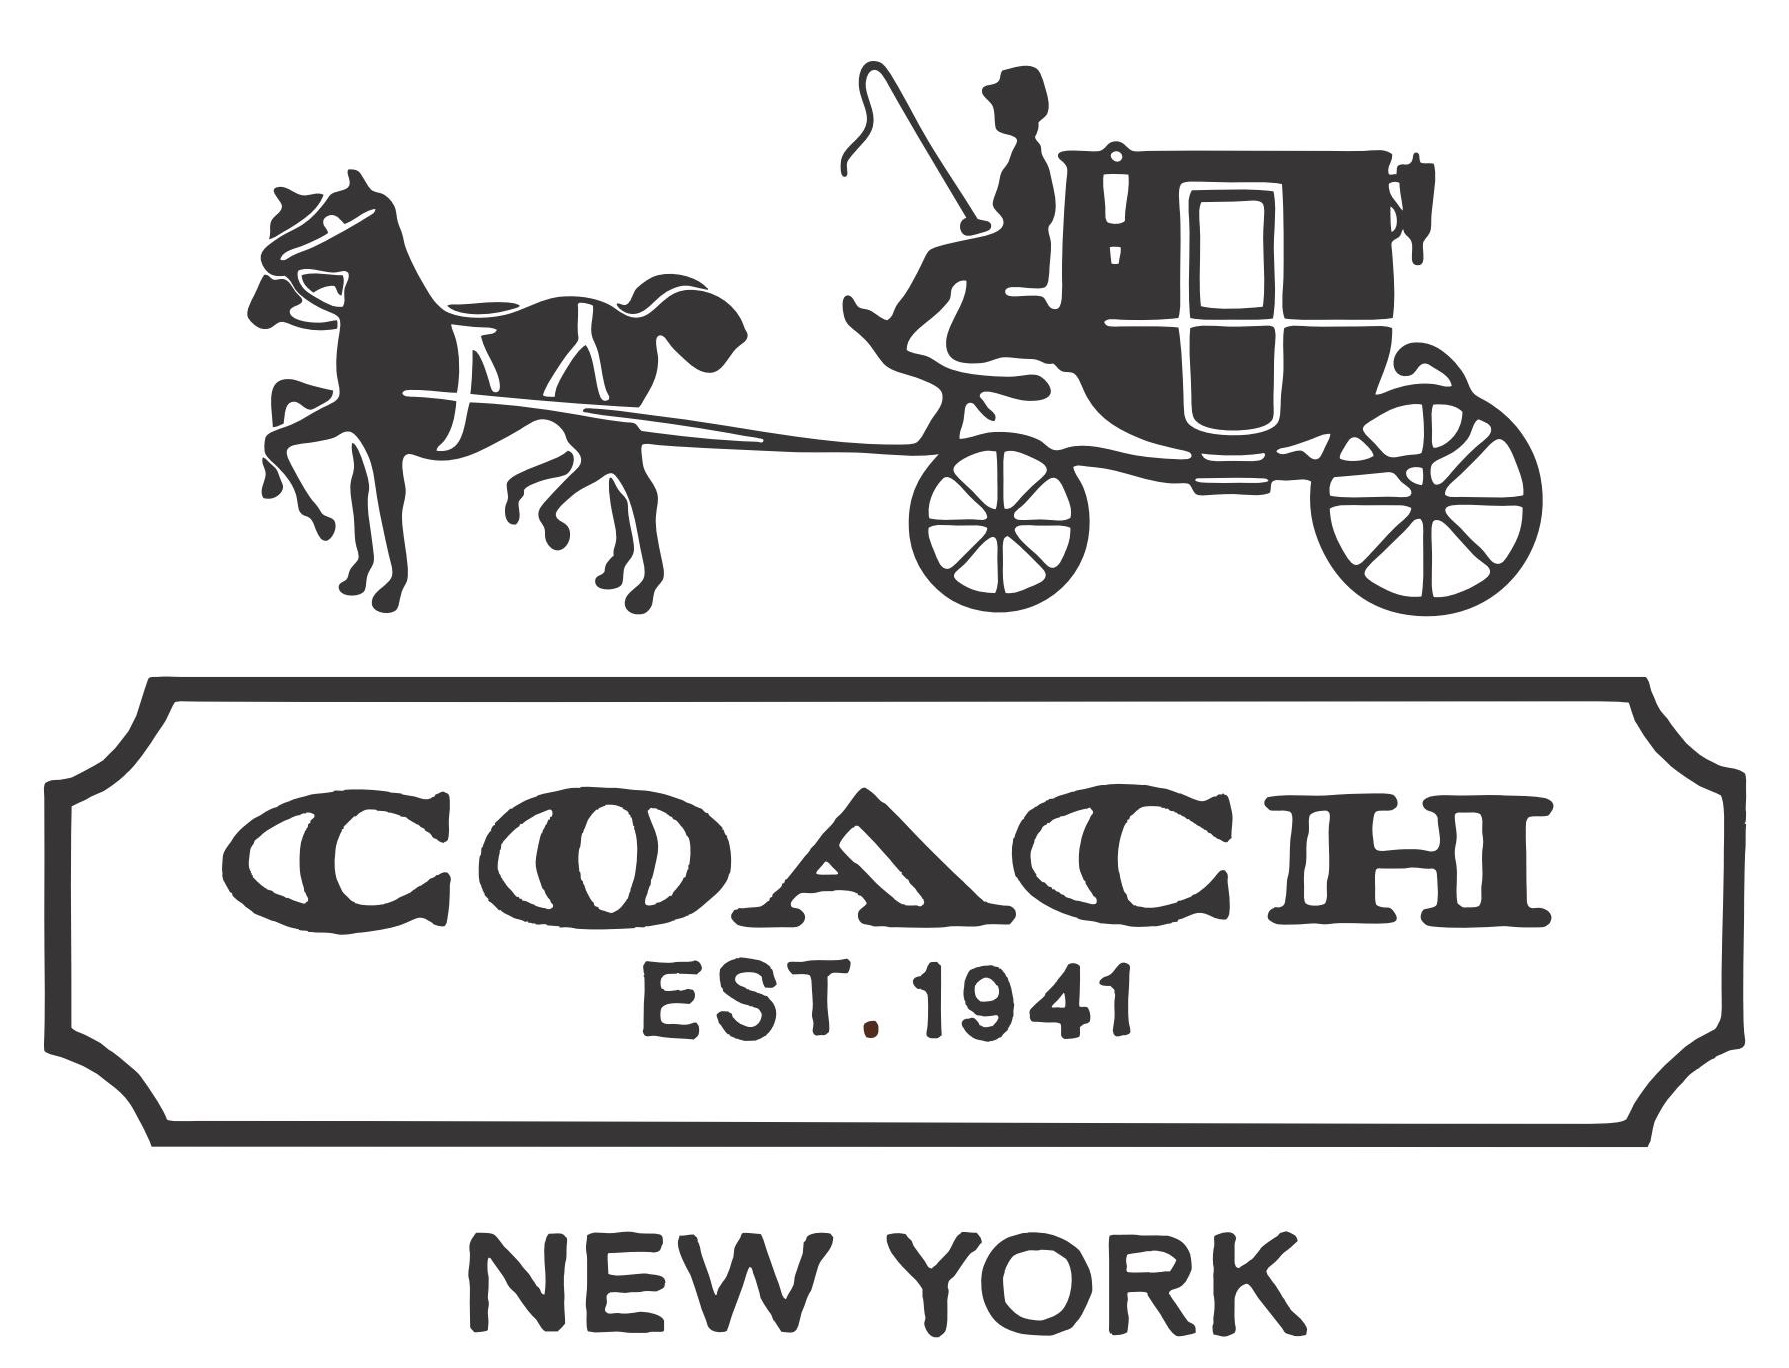 The Coach - A Brand That Stands For Authenticity